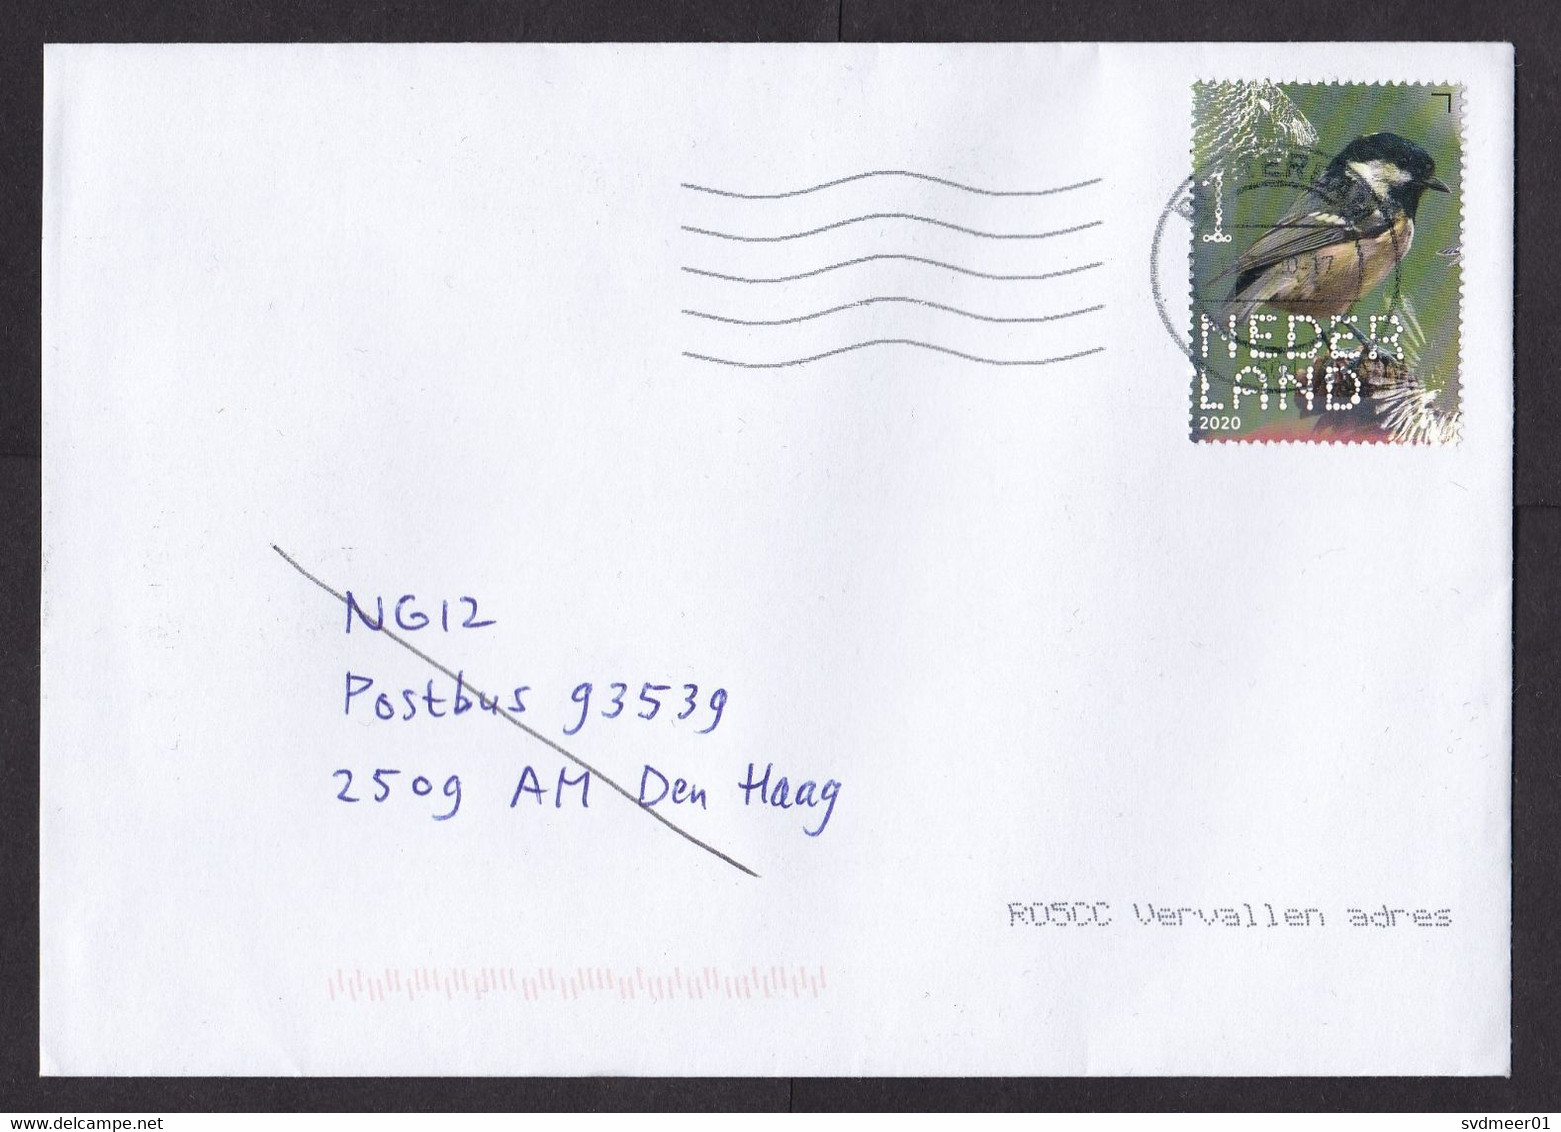 Netherlands: Cover, 2020, 1 Stamp, Titmouse Bird, Retour, Returned, Printed Address Cancelled (traces Of Use) - Storia Postale